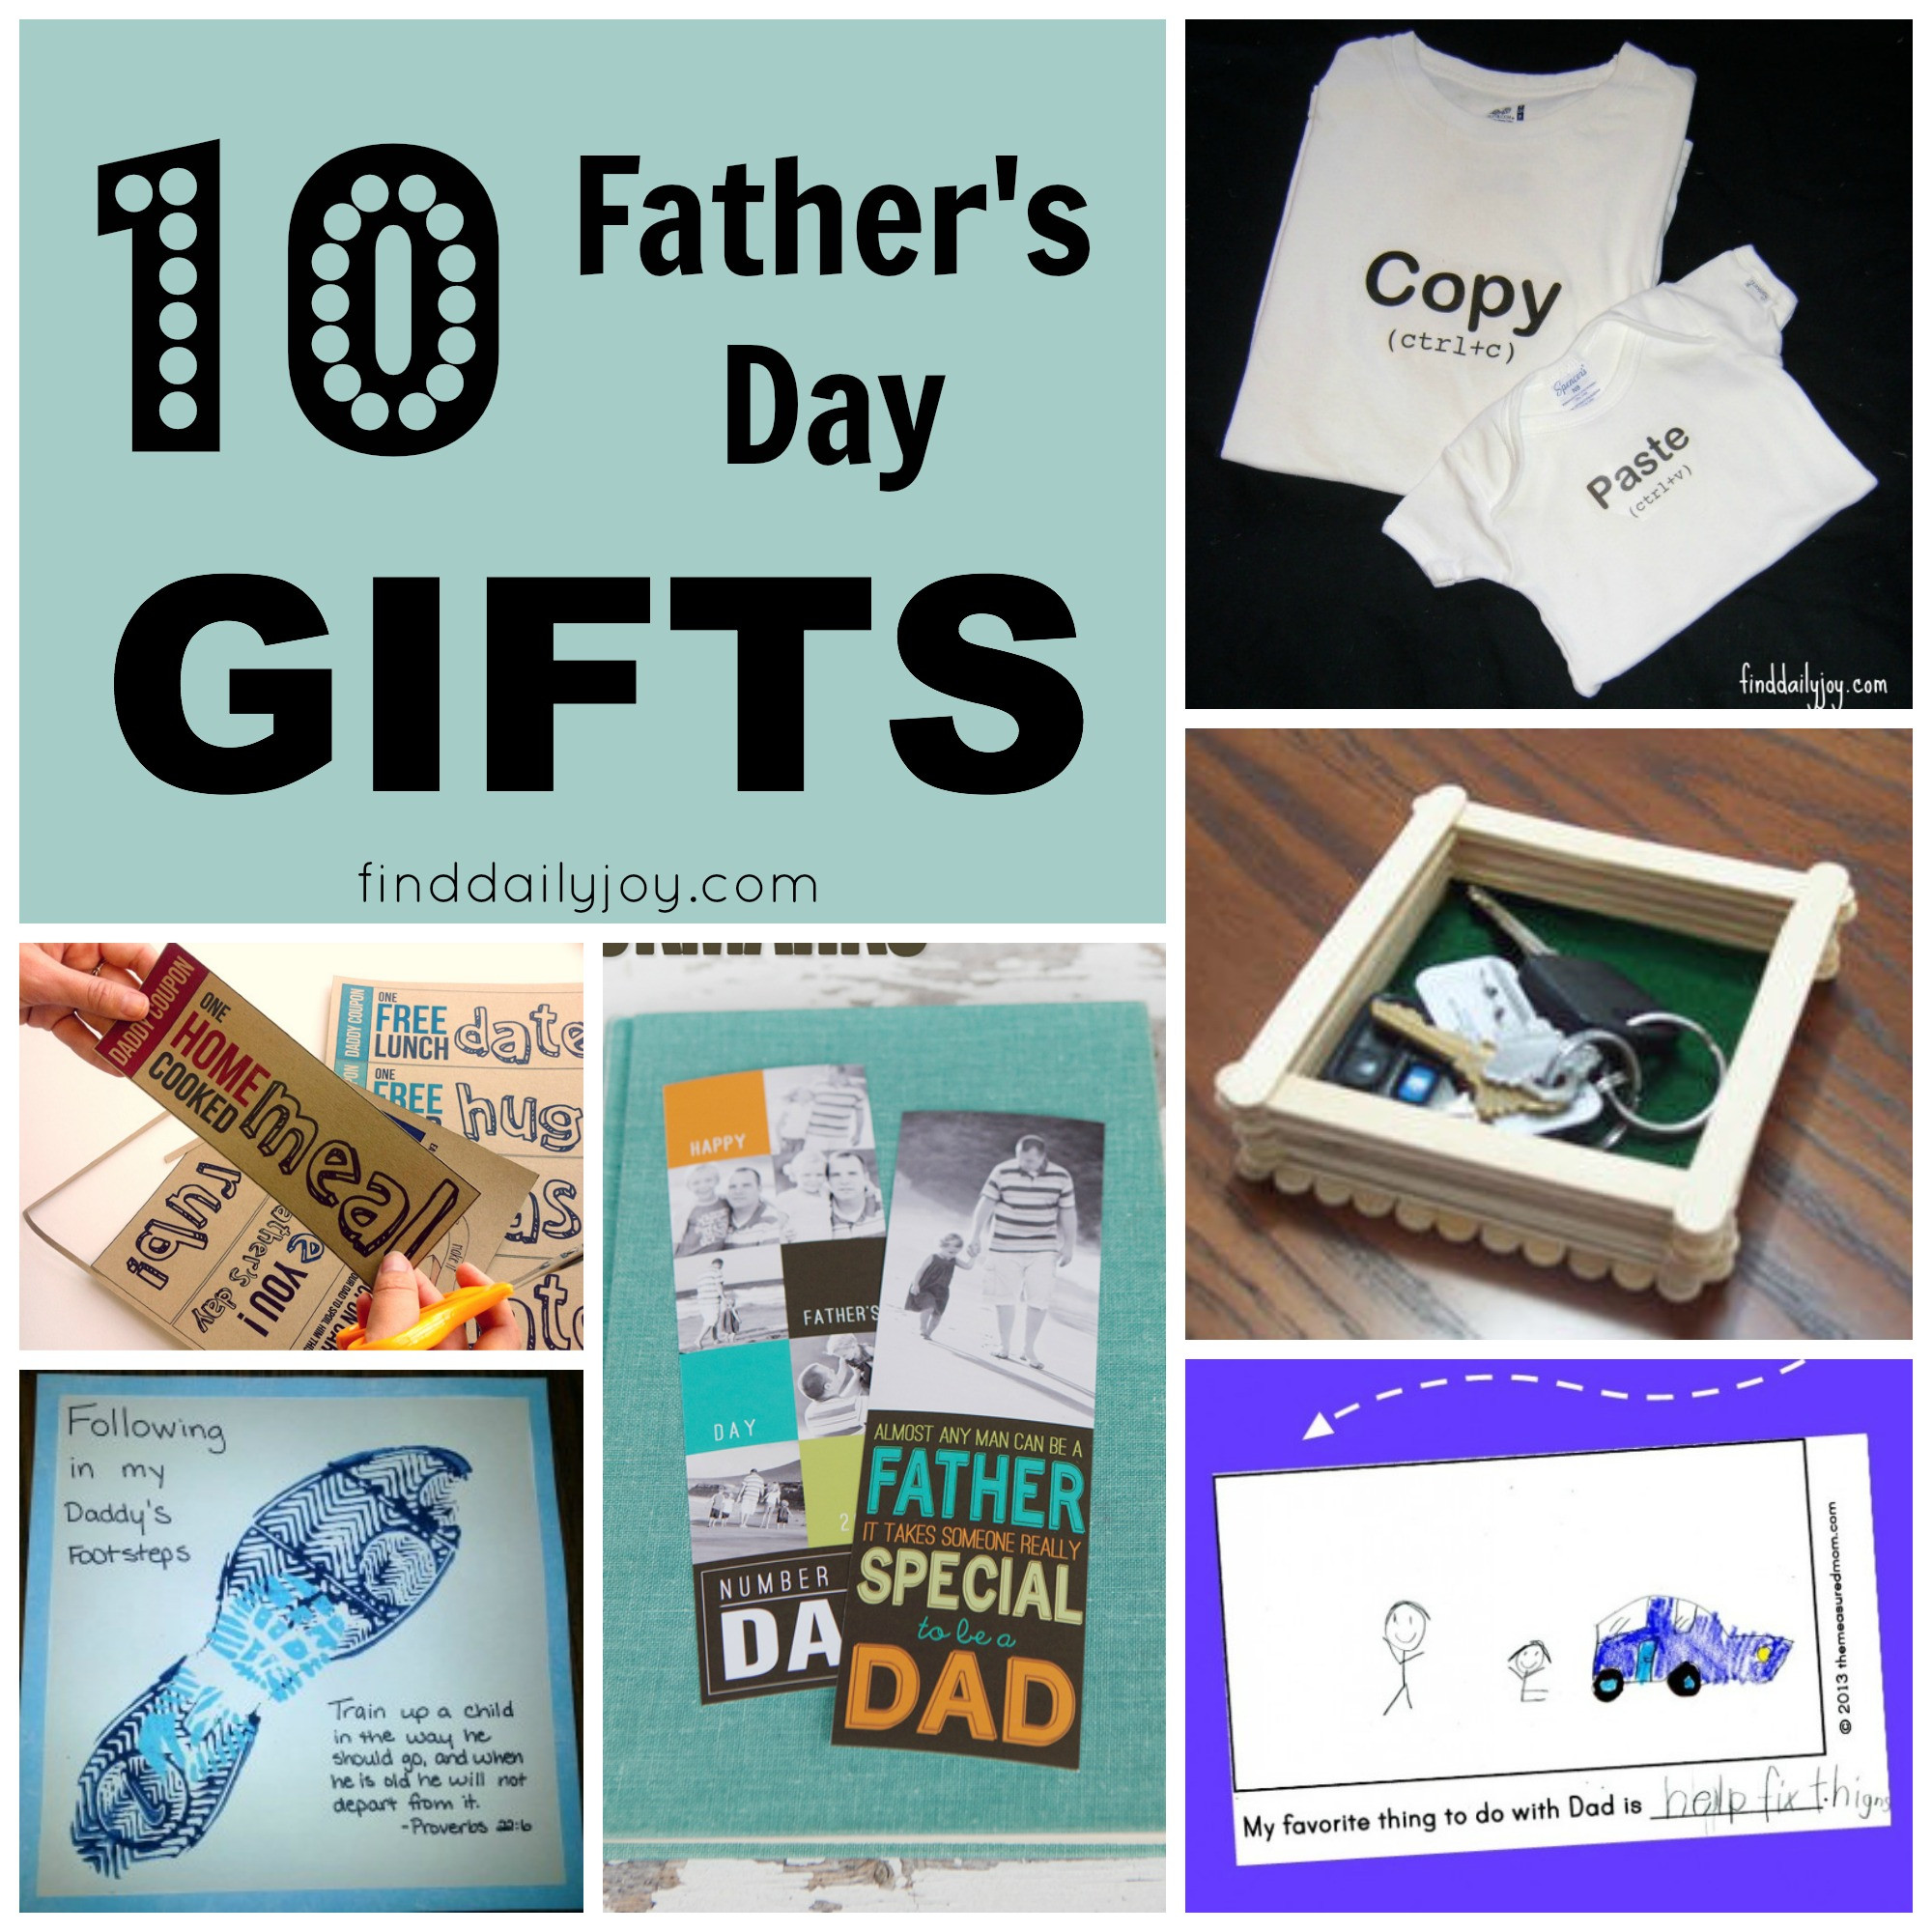 Church Father'S Day Gift Ideas
 10 Father’s Day Gifts